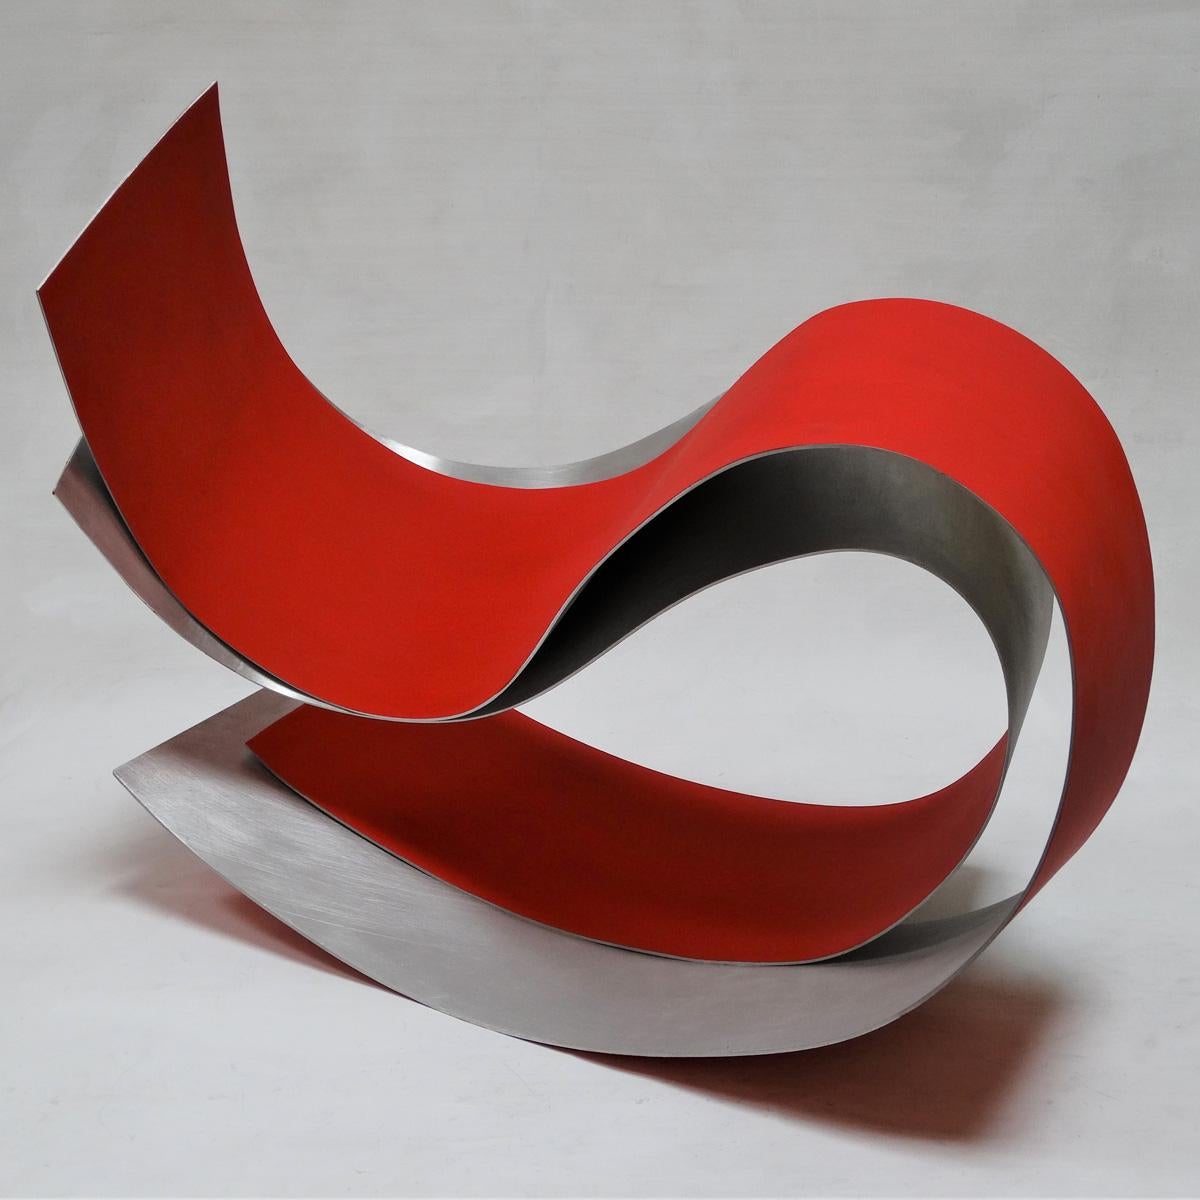 Acull 46 - Abstract, Outdoor Sculpture, Contemporary, Art, Red, Rafael Amorós For Sale 1